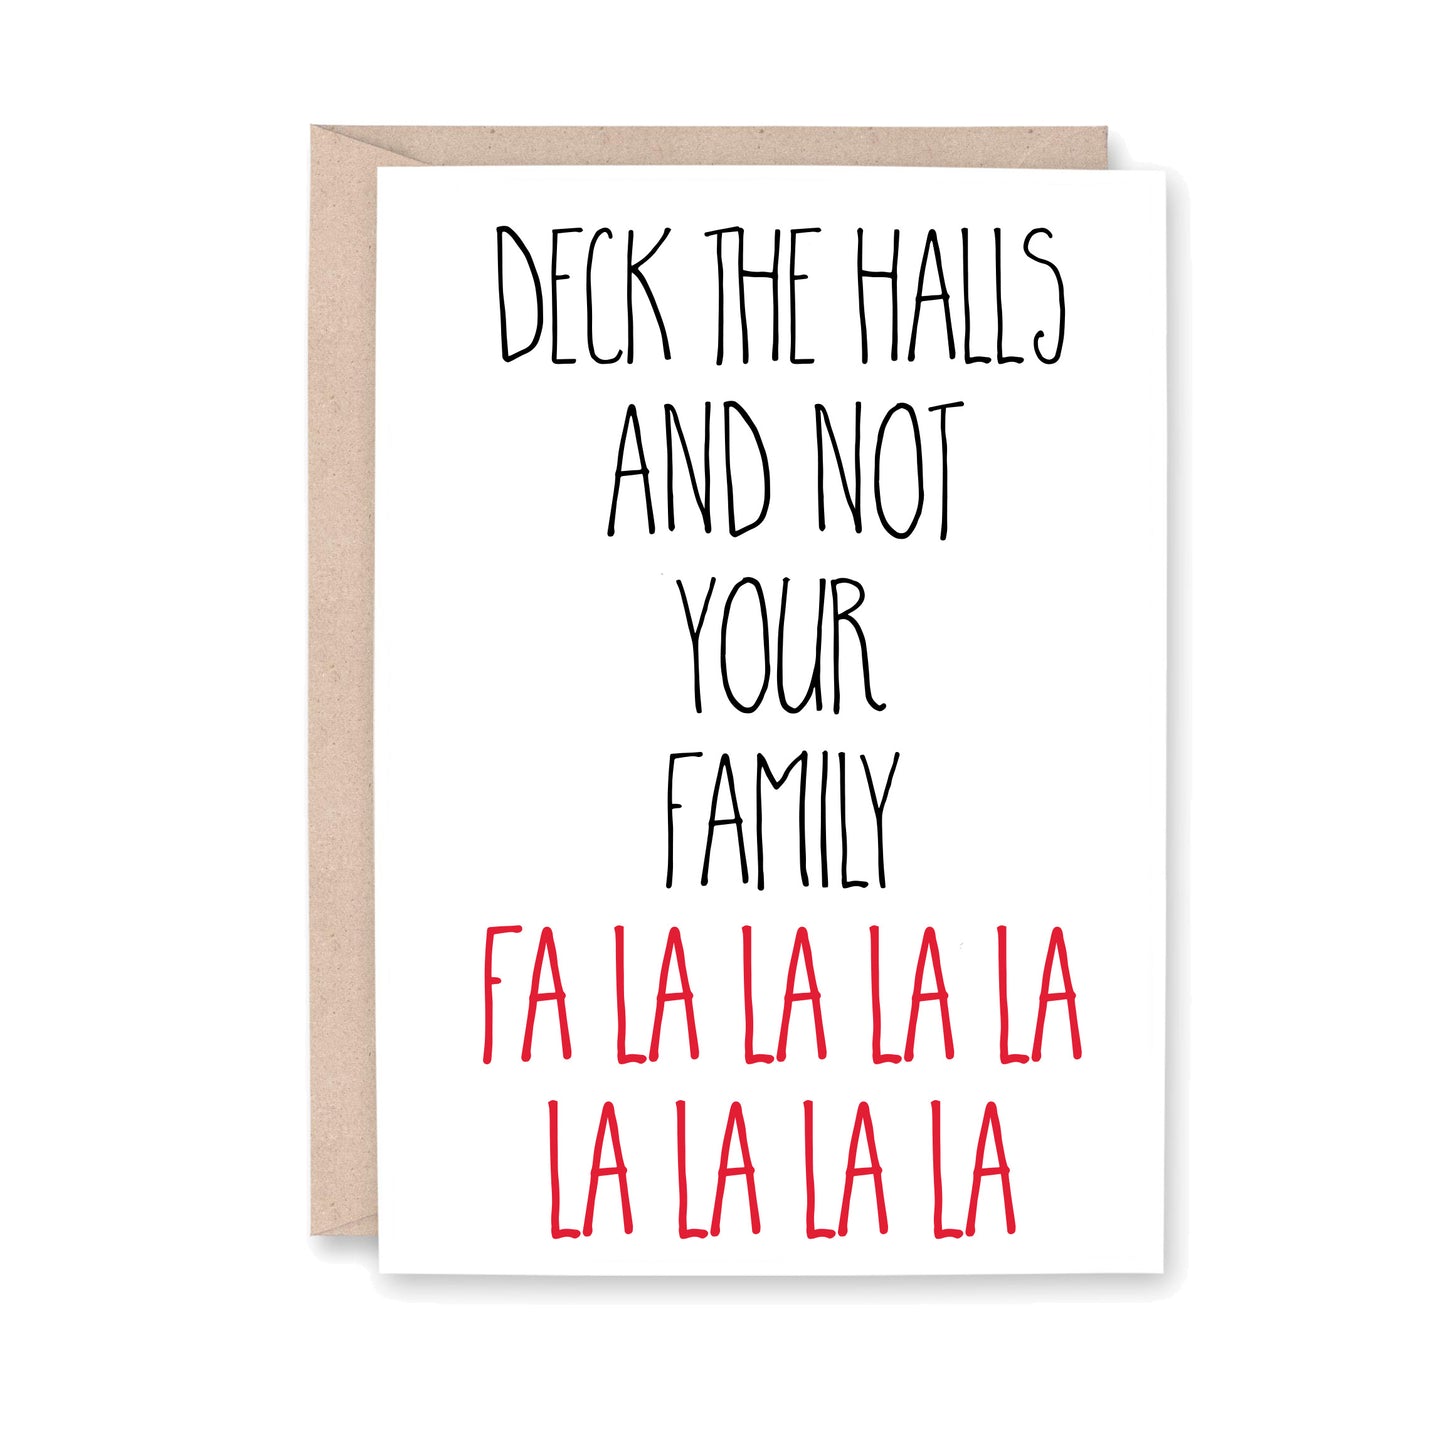 Greeting card that says, Deckt he halls and not your family FA LA LA LA LA LA LA LA LA